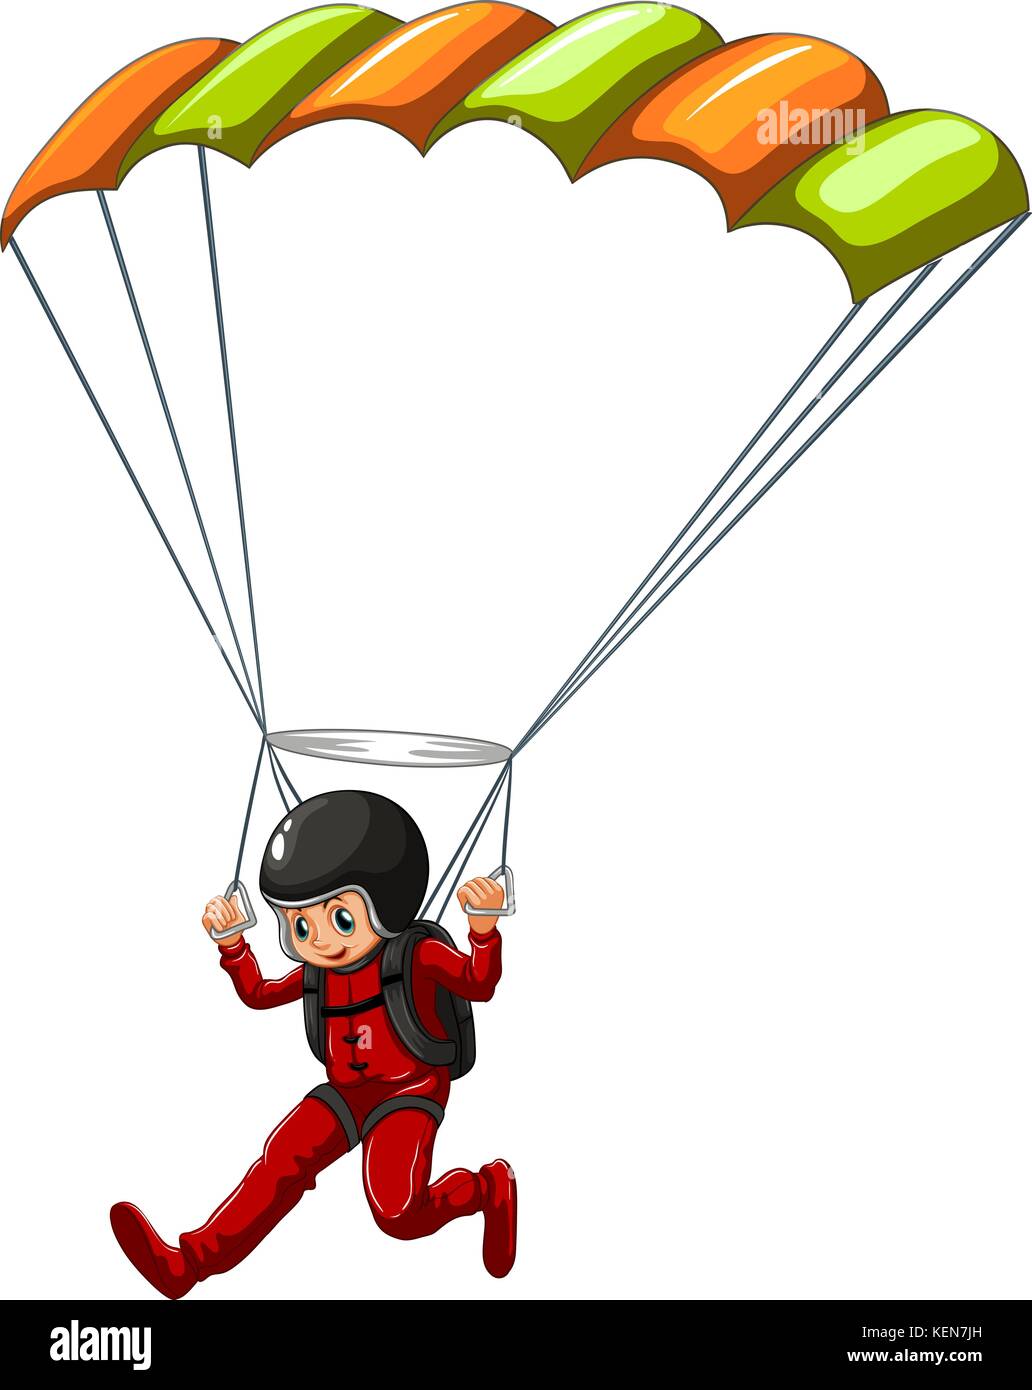 Illustration of a man doing sky diving Stock Vector